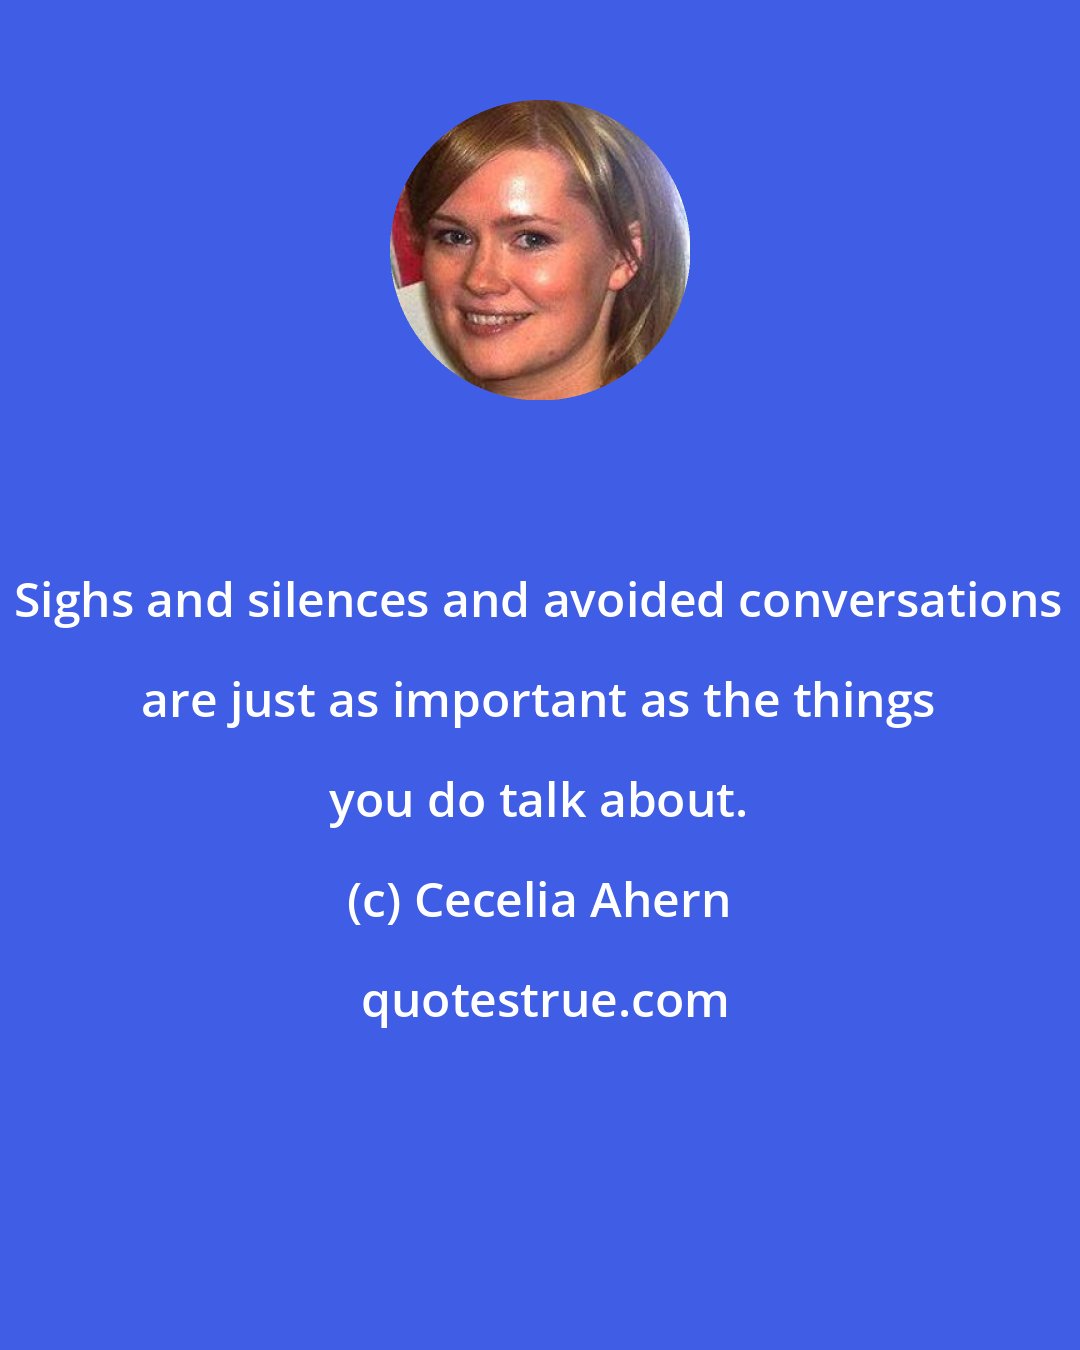 Cecelia Ahern: Sighs and silences and avoided conversations are just as important as the things you do talk about.